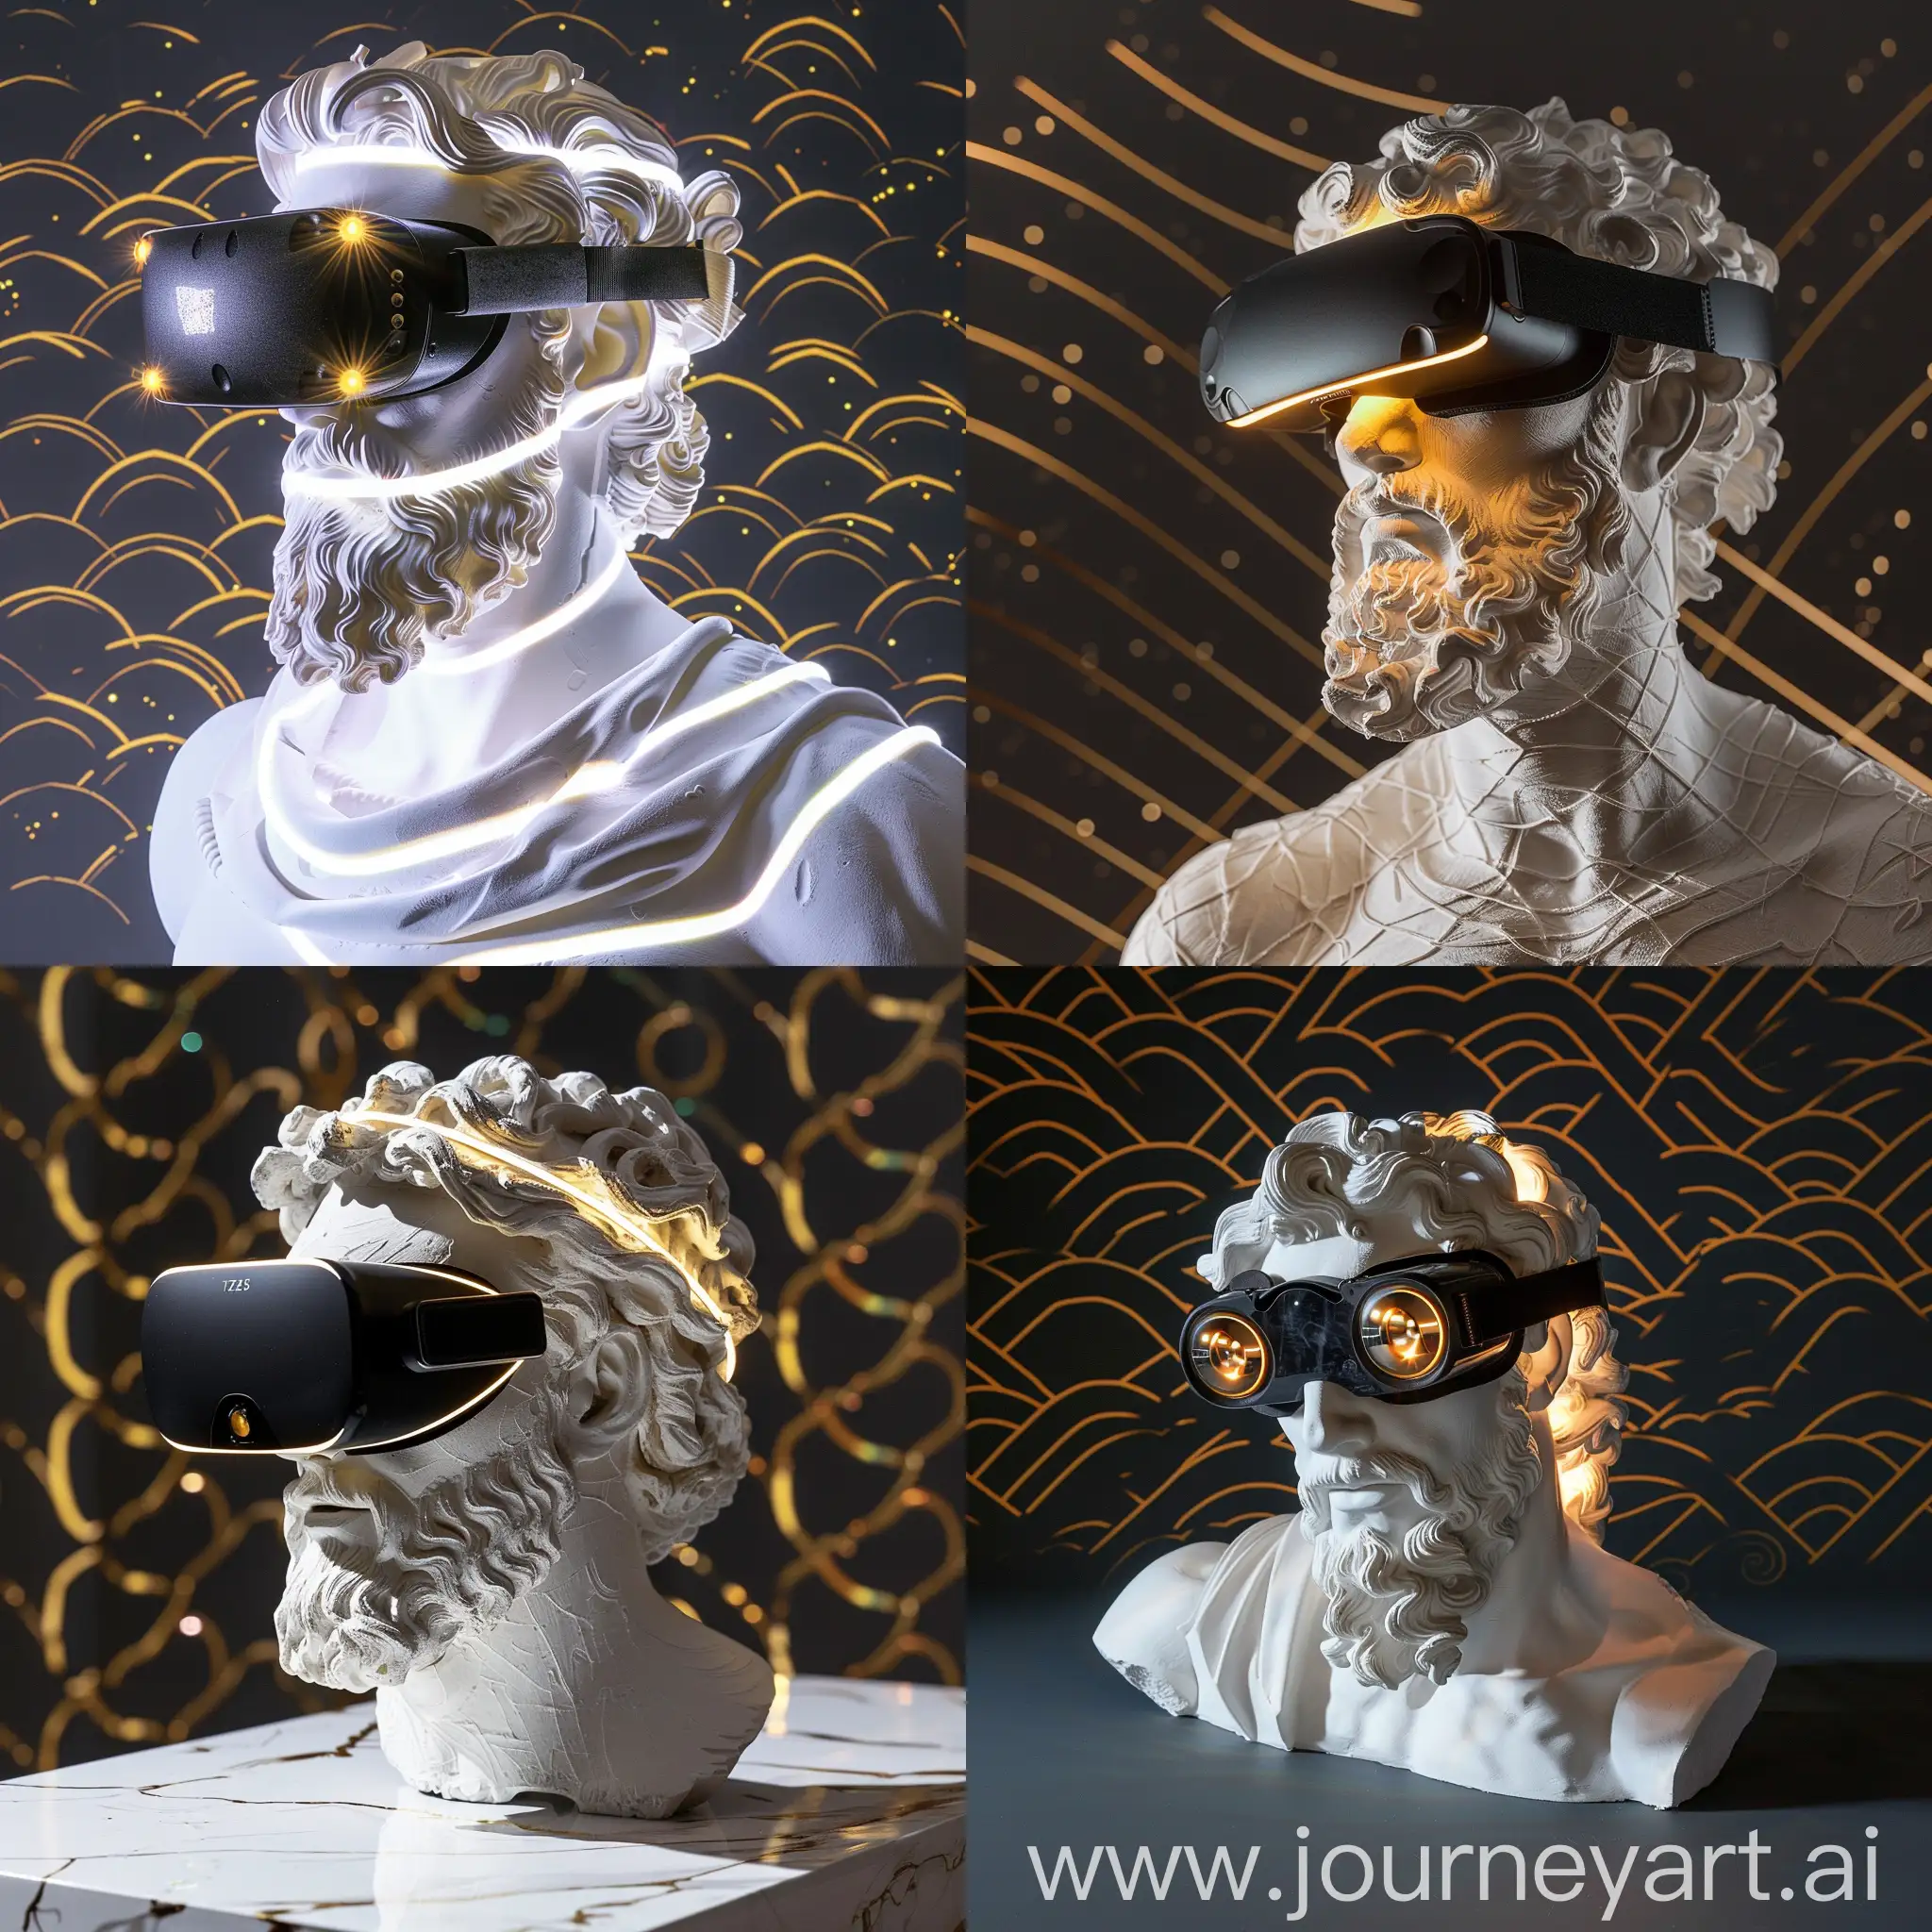 A Plaster Sculpture of Zeus, Black VR Glasses With Golden LED, White Light Reflections on Sculpture, Gold Techno Wave Pattern in Dark Background, Dreamy Pose, Medium Shot, High Precision --v 6.0